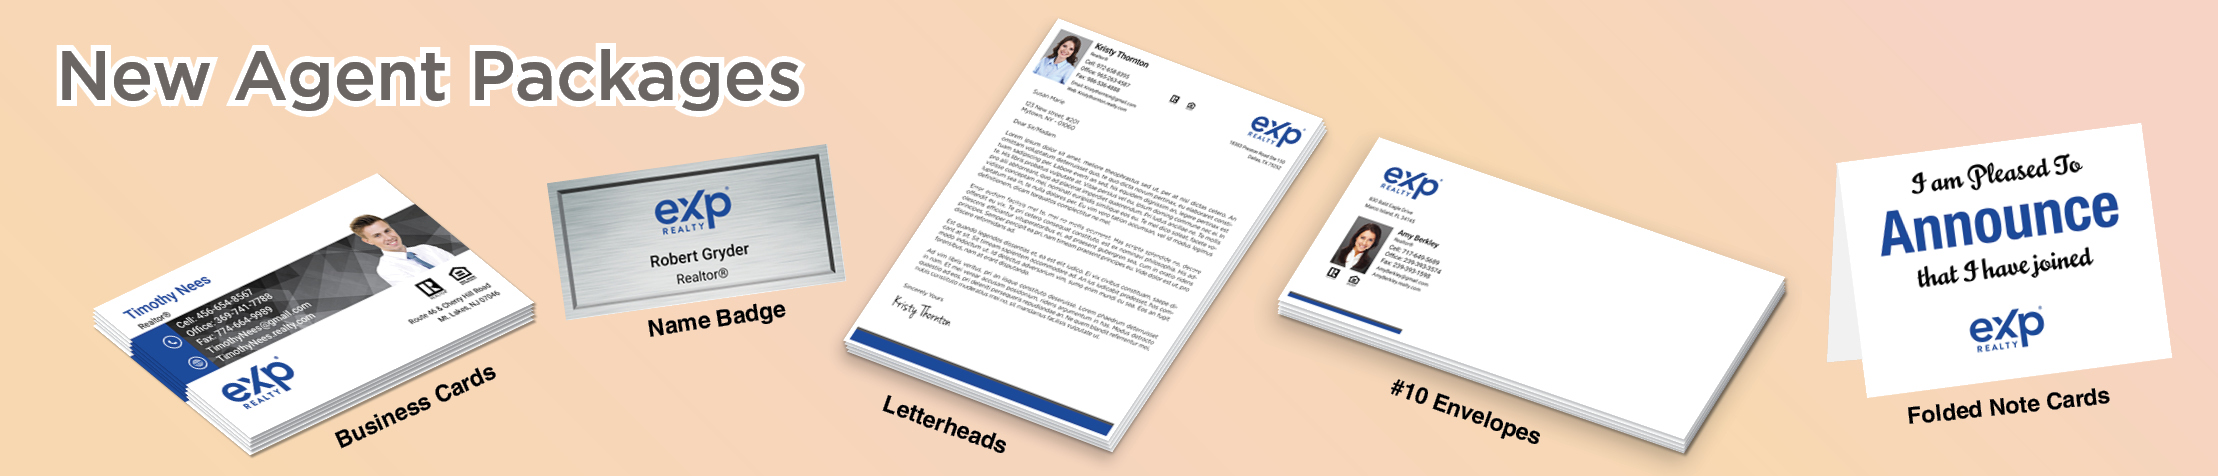 eXp Realty Real Estate Gold, Silver and Bronze Agent Packages - eXp Realty approved vendor personalized business cards, letterhead, envelopes and note cards | BestPrintBuy.com